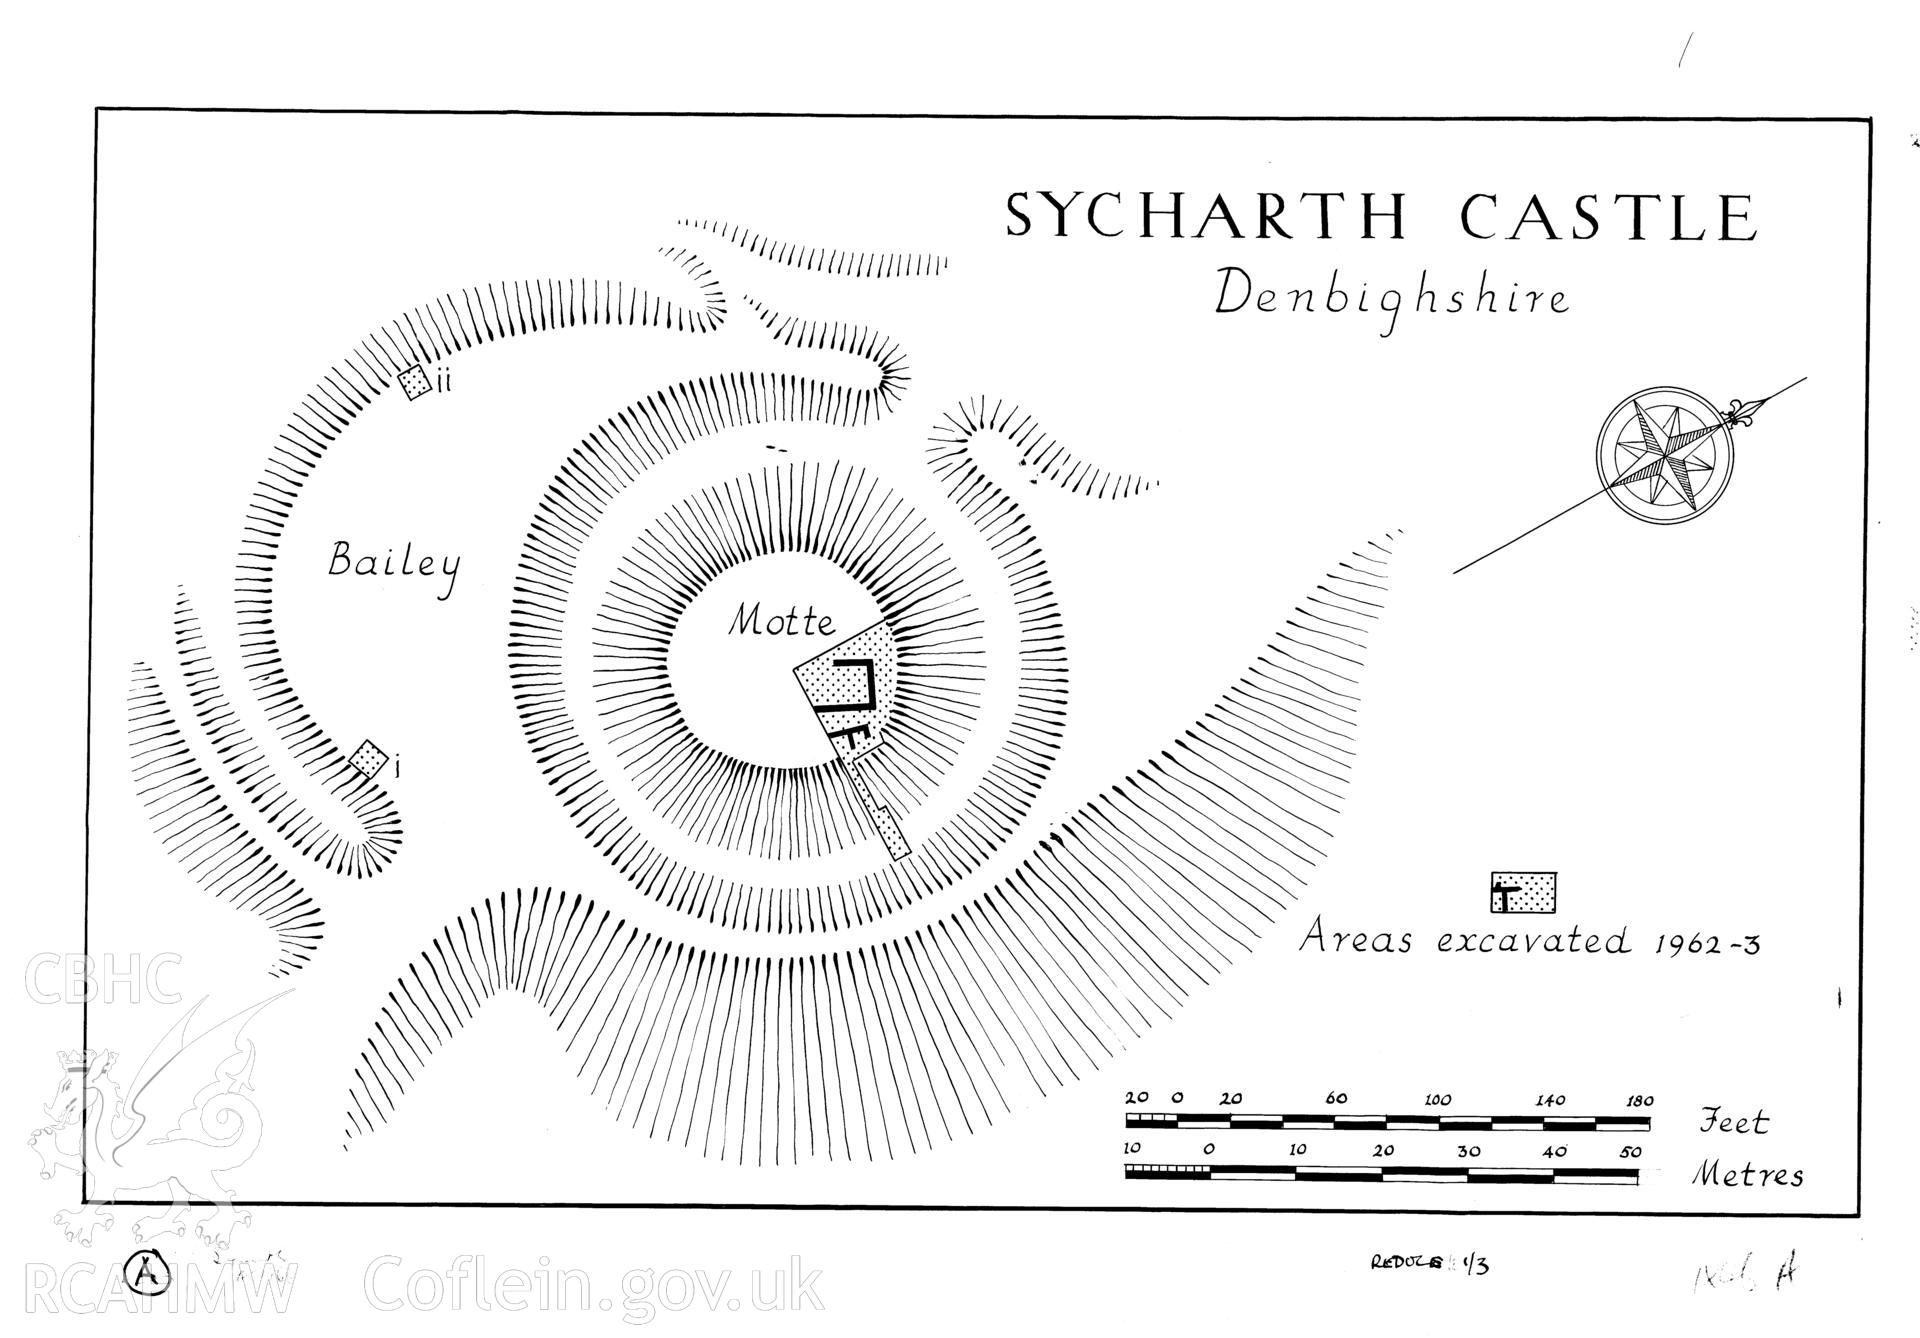 Ink drawing by Douglas Hague showing plan of Sycharth Castle, produced during the excavations of 1962-63 and published in Archaeologia Cambrensis Vol CXV, 1966, fig 1.